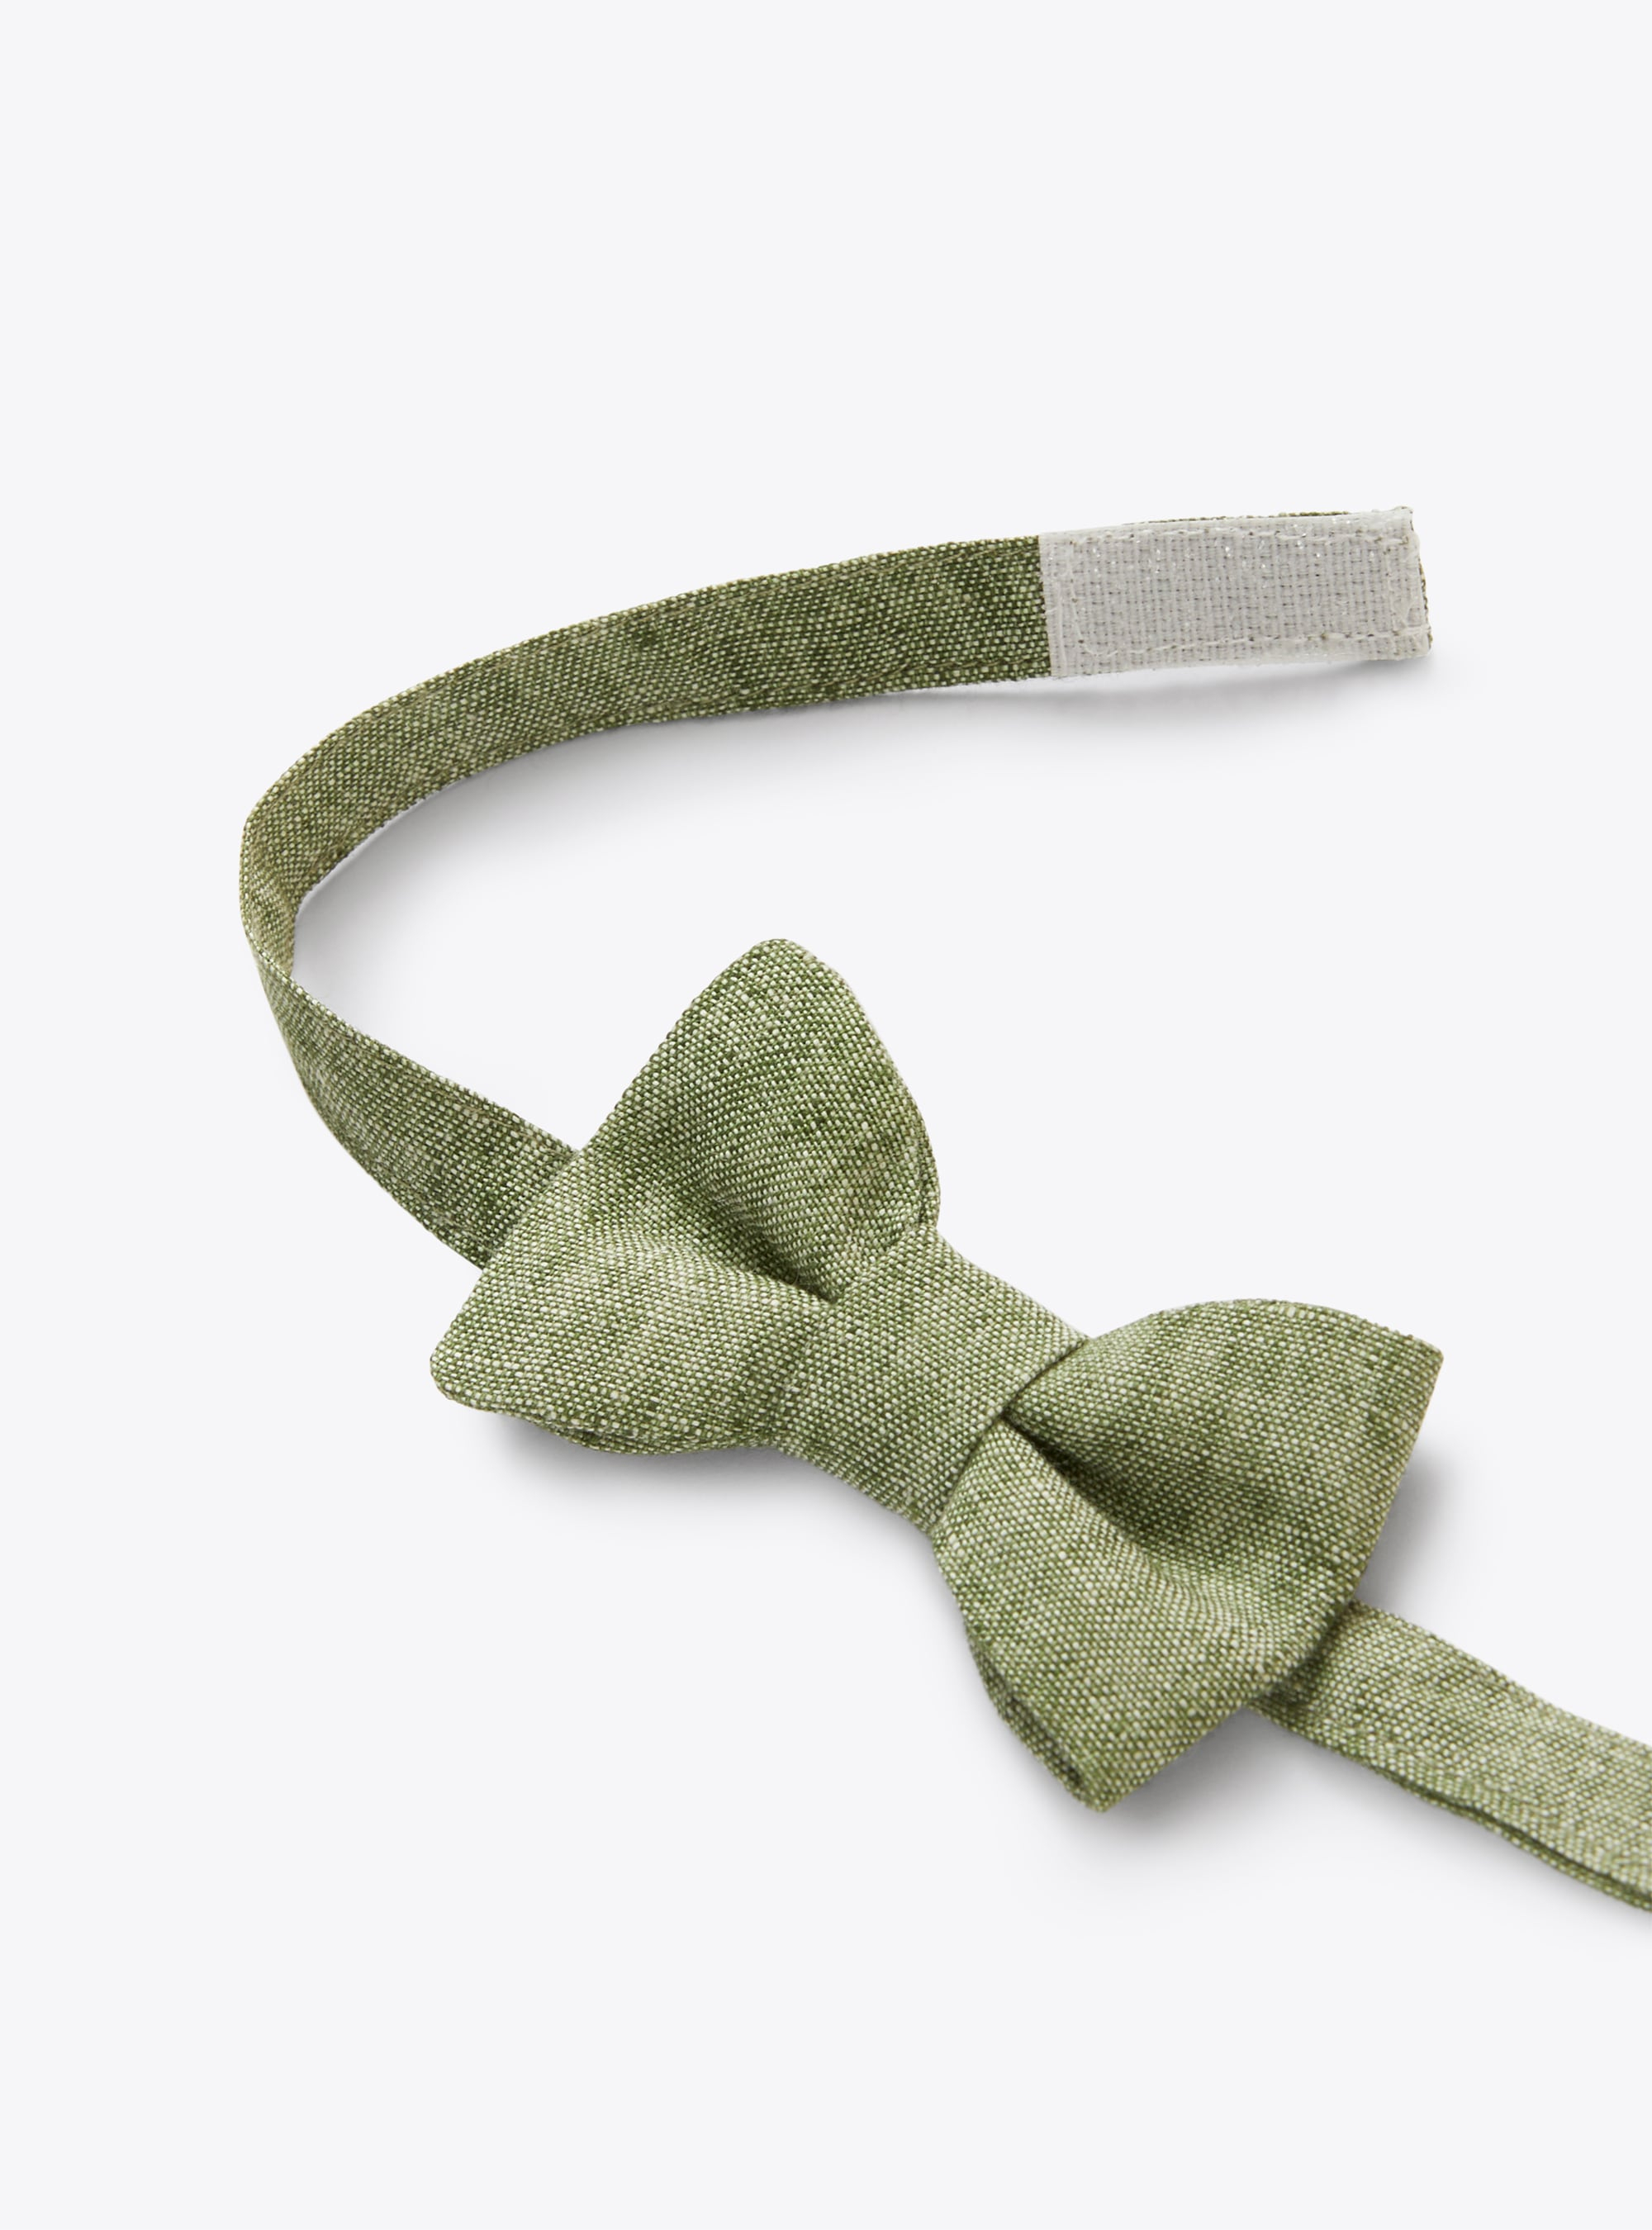 Bow tie in mélange sage-green linen - Green | Il Gufo